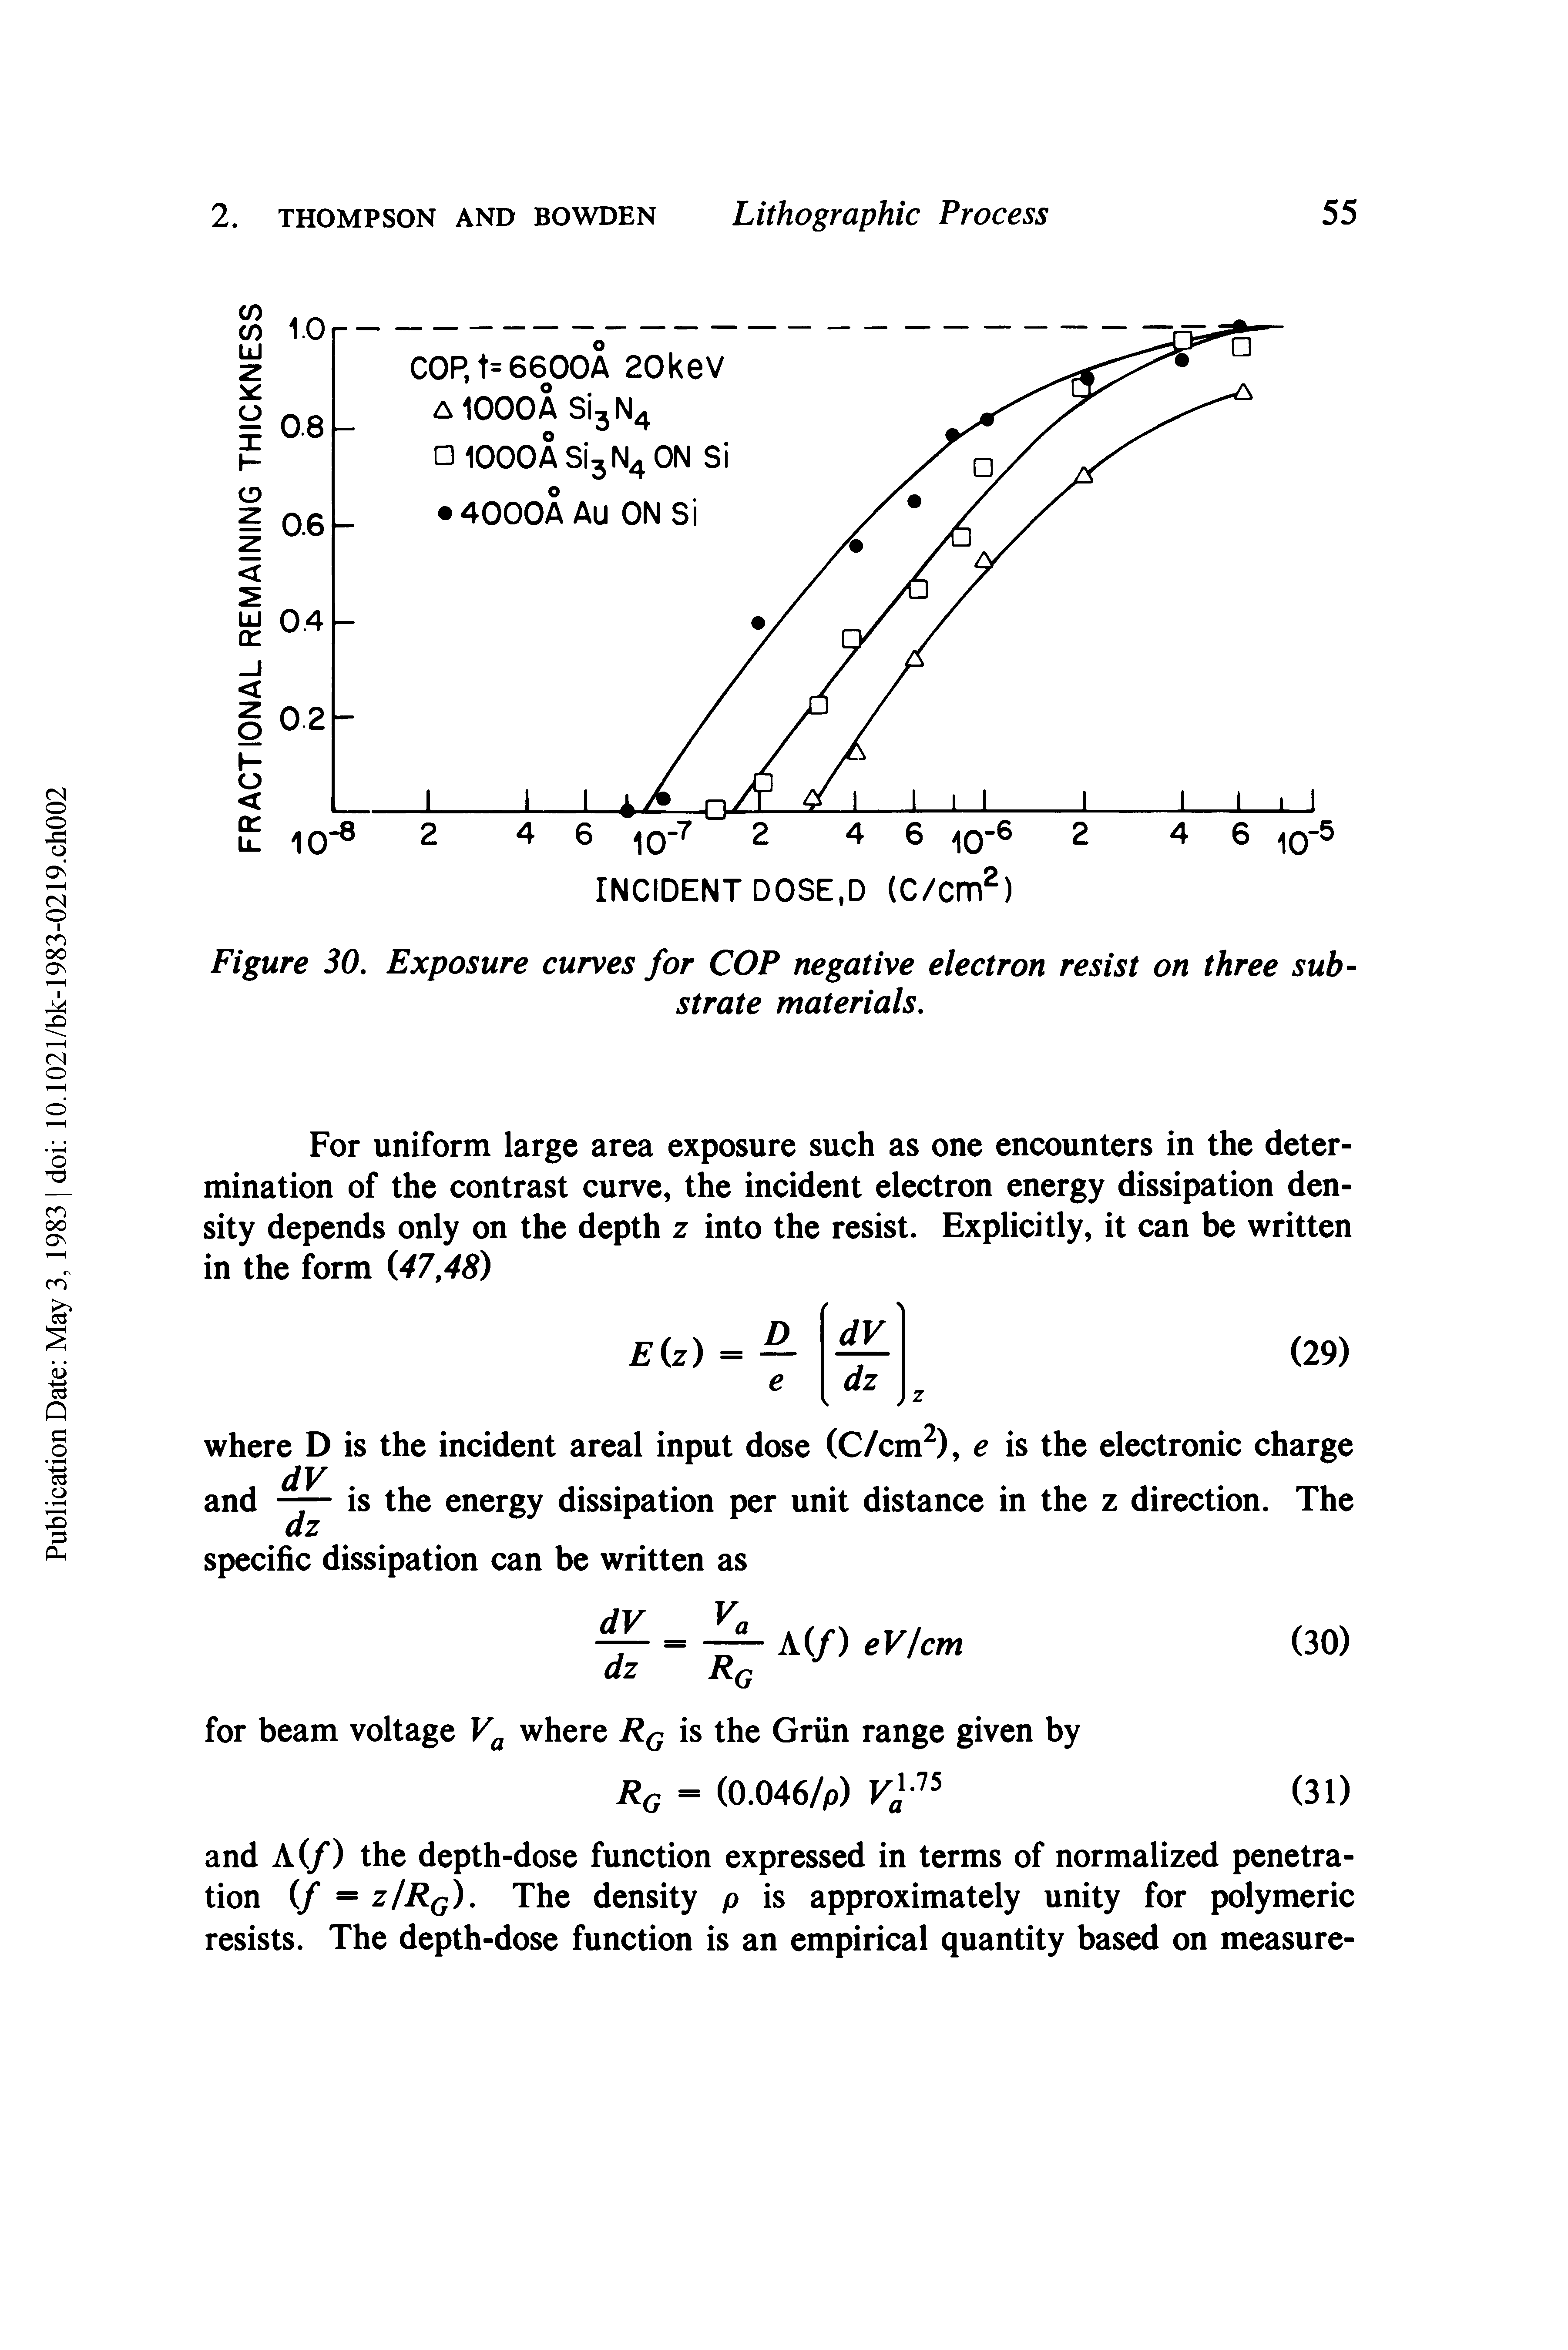 Figure 30. Exposure curves for COP negative electron resist on three substrate materials.